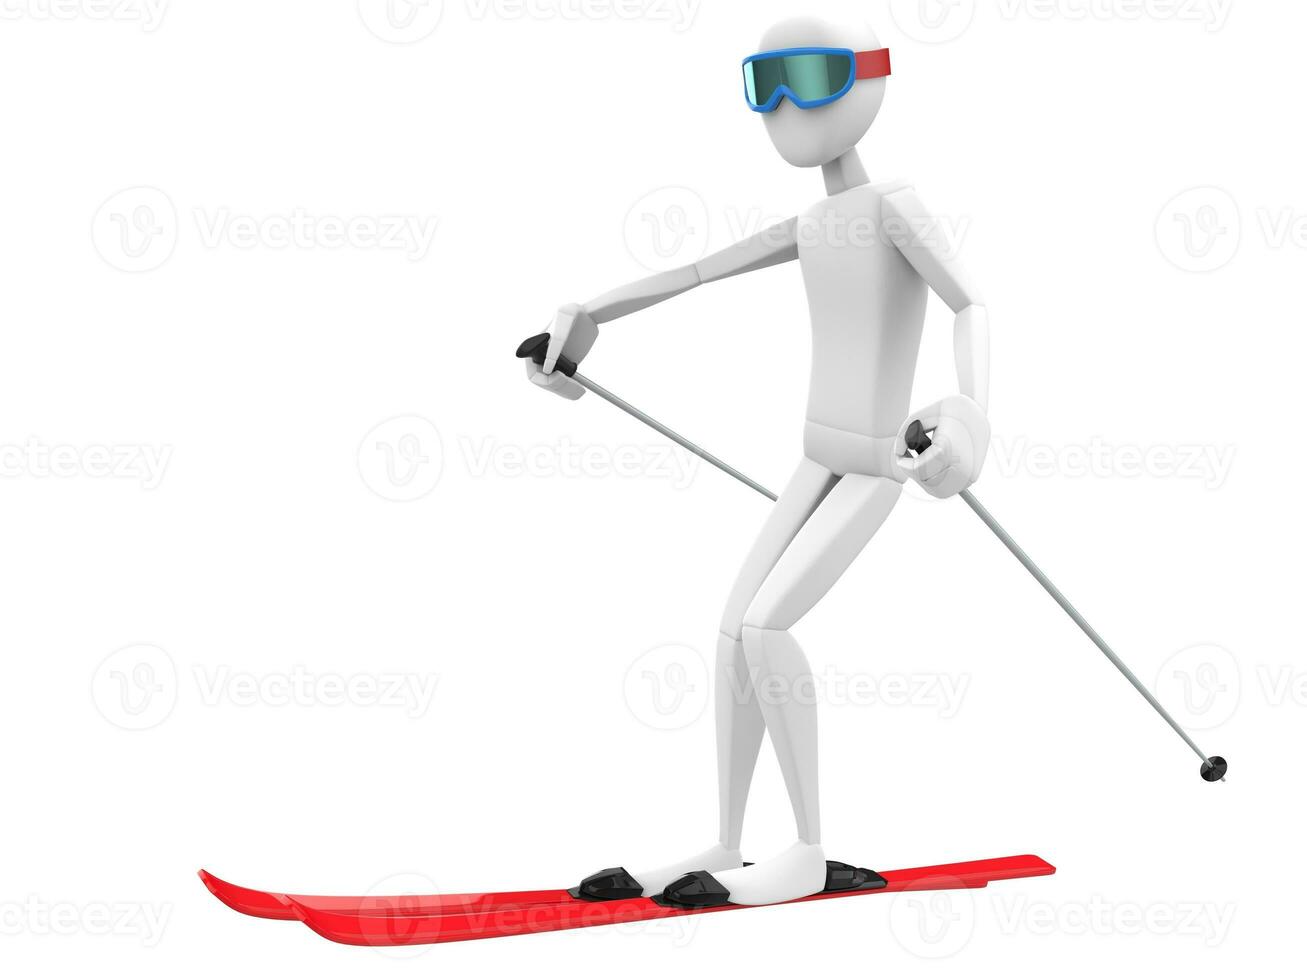 Skier with blue goggles and red skis - side view photo